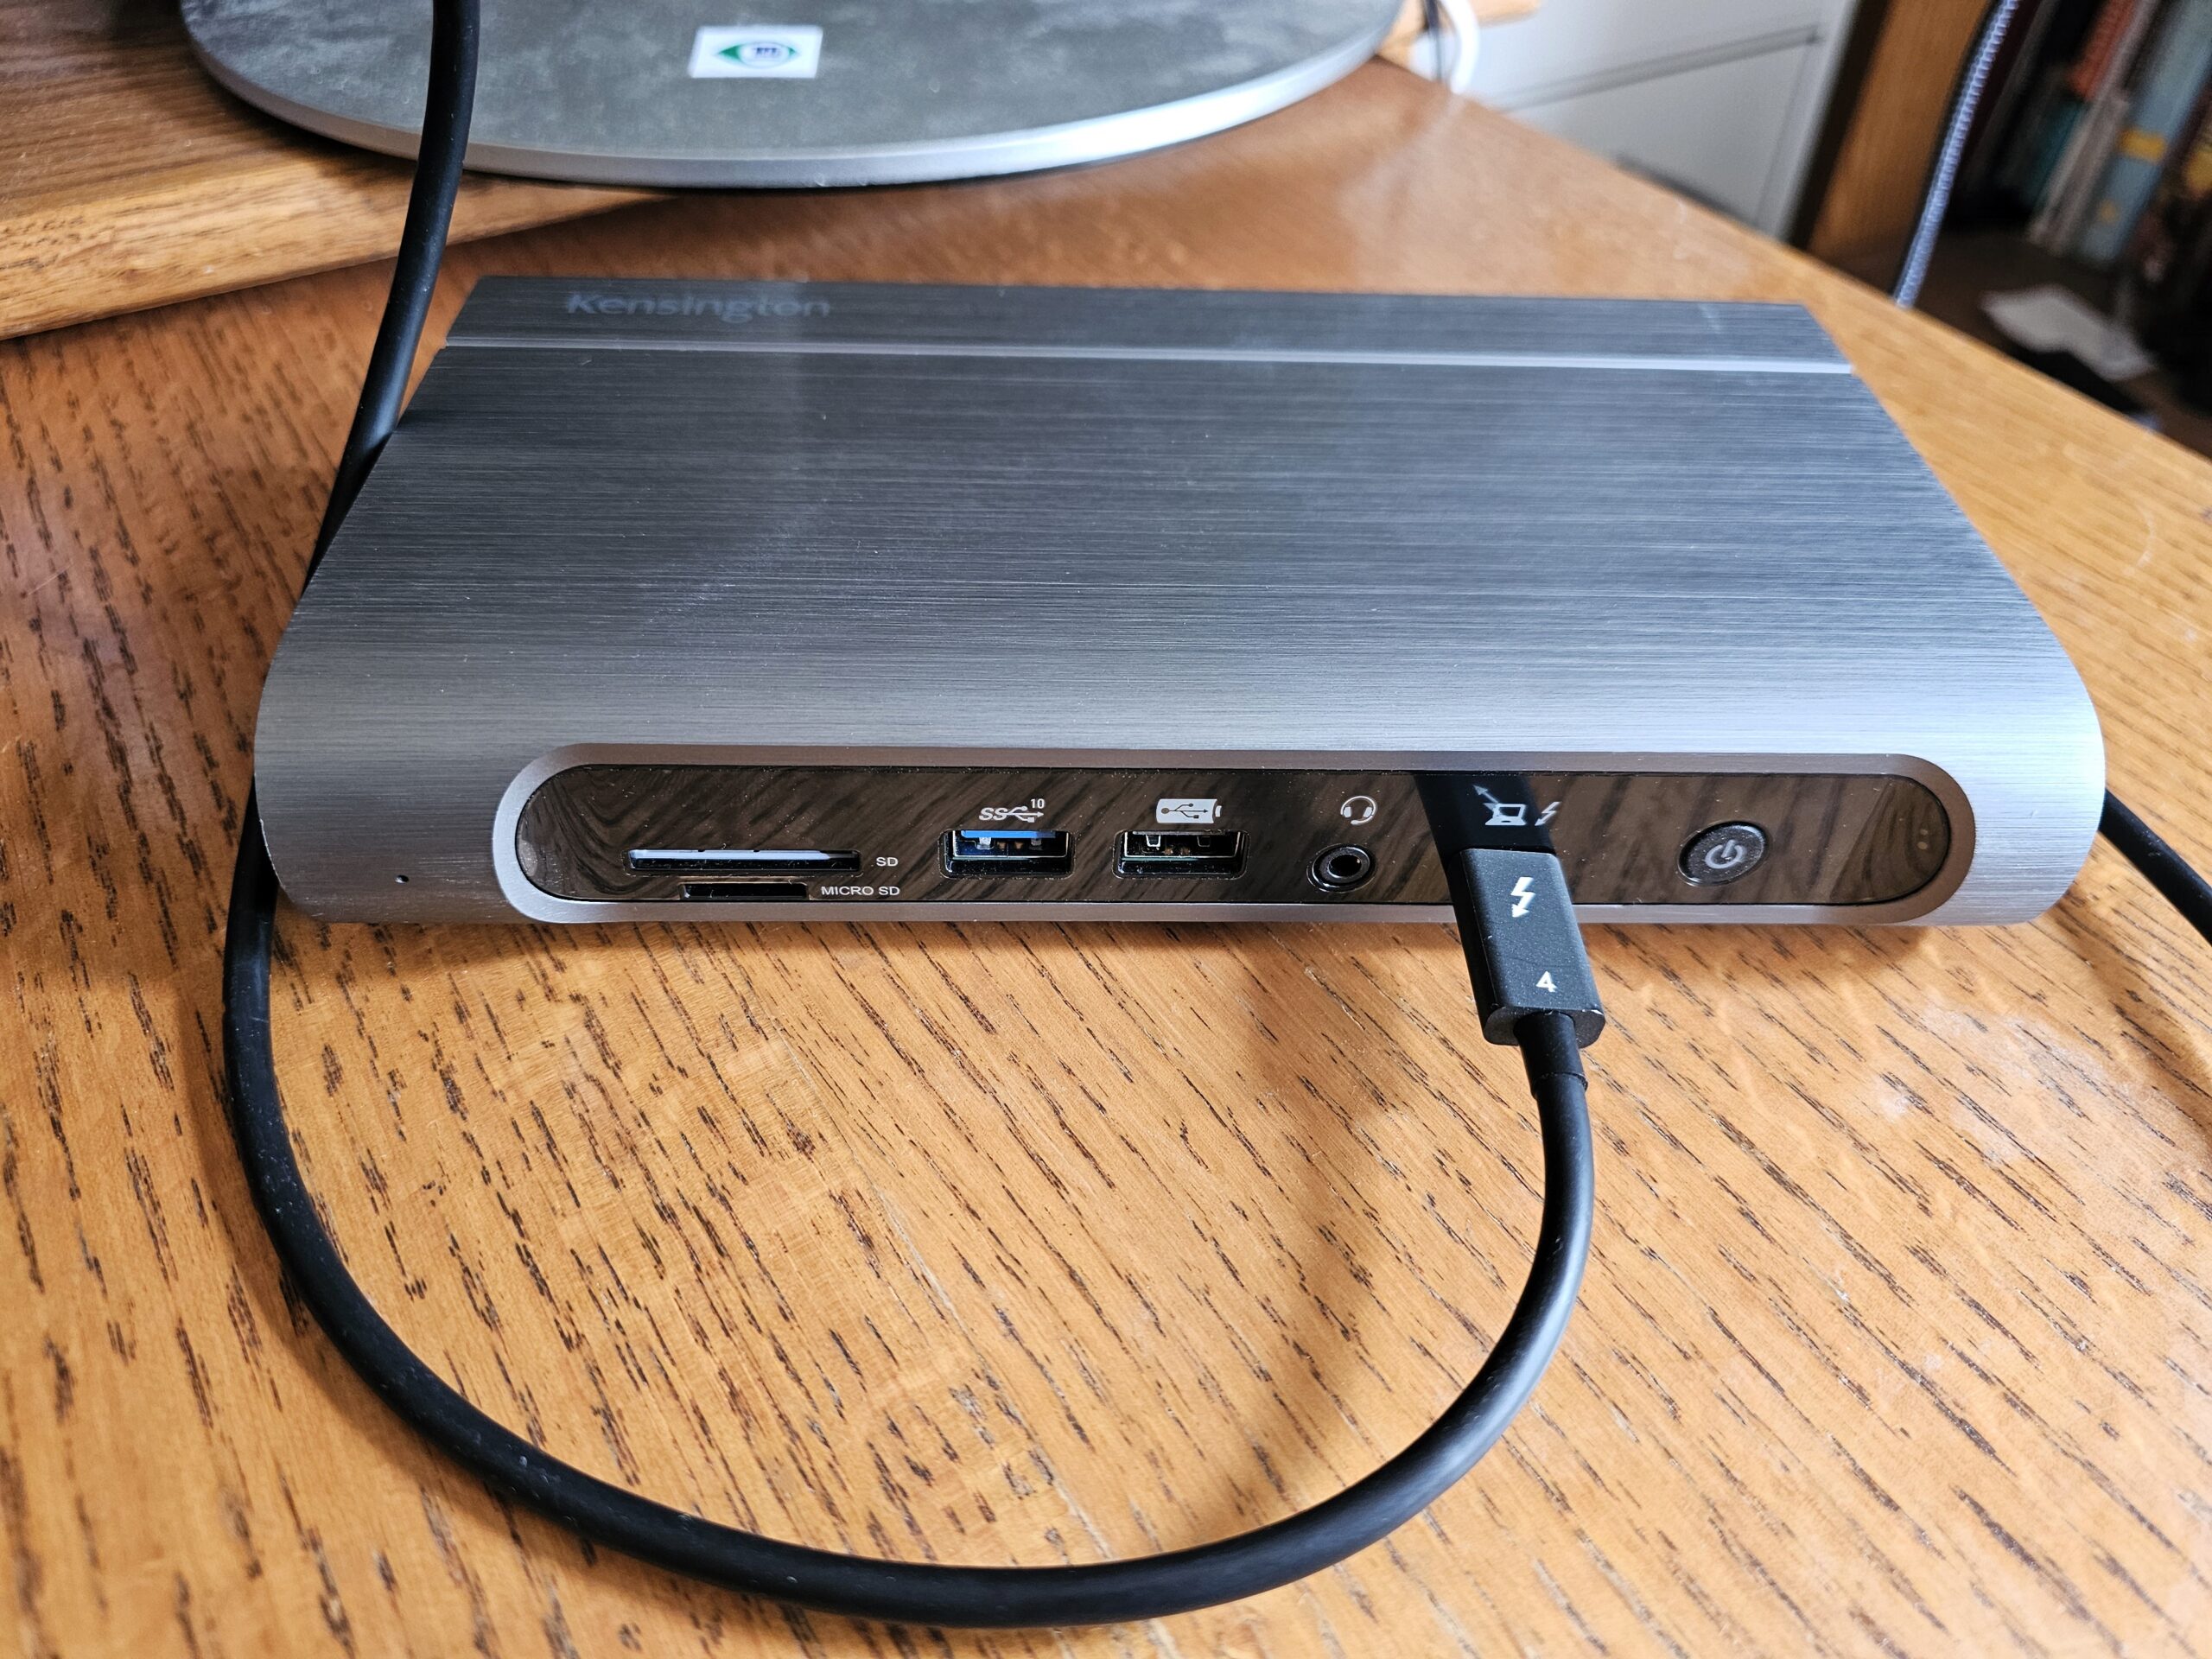 Kensington SD5800T Thunderbolt 4 Dock review: Top rate in all programs